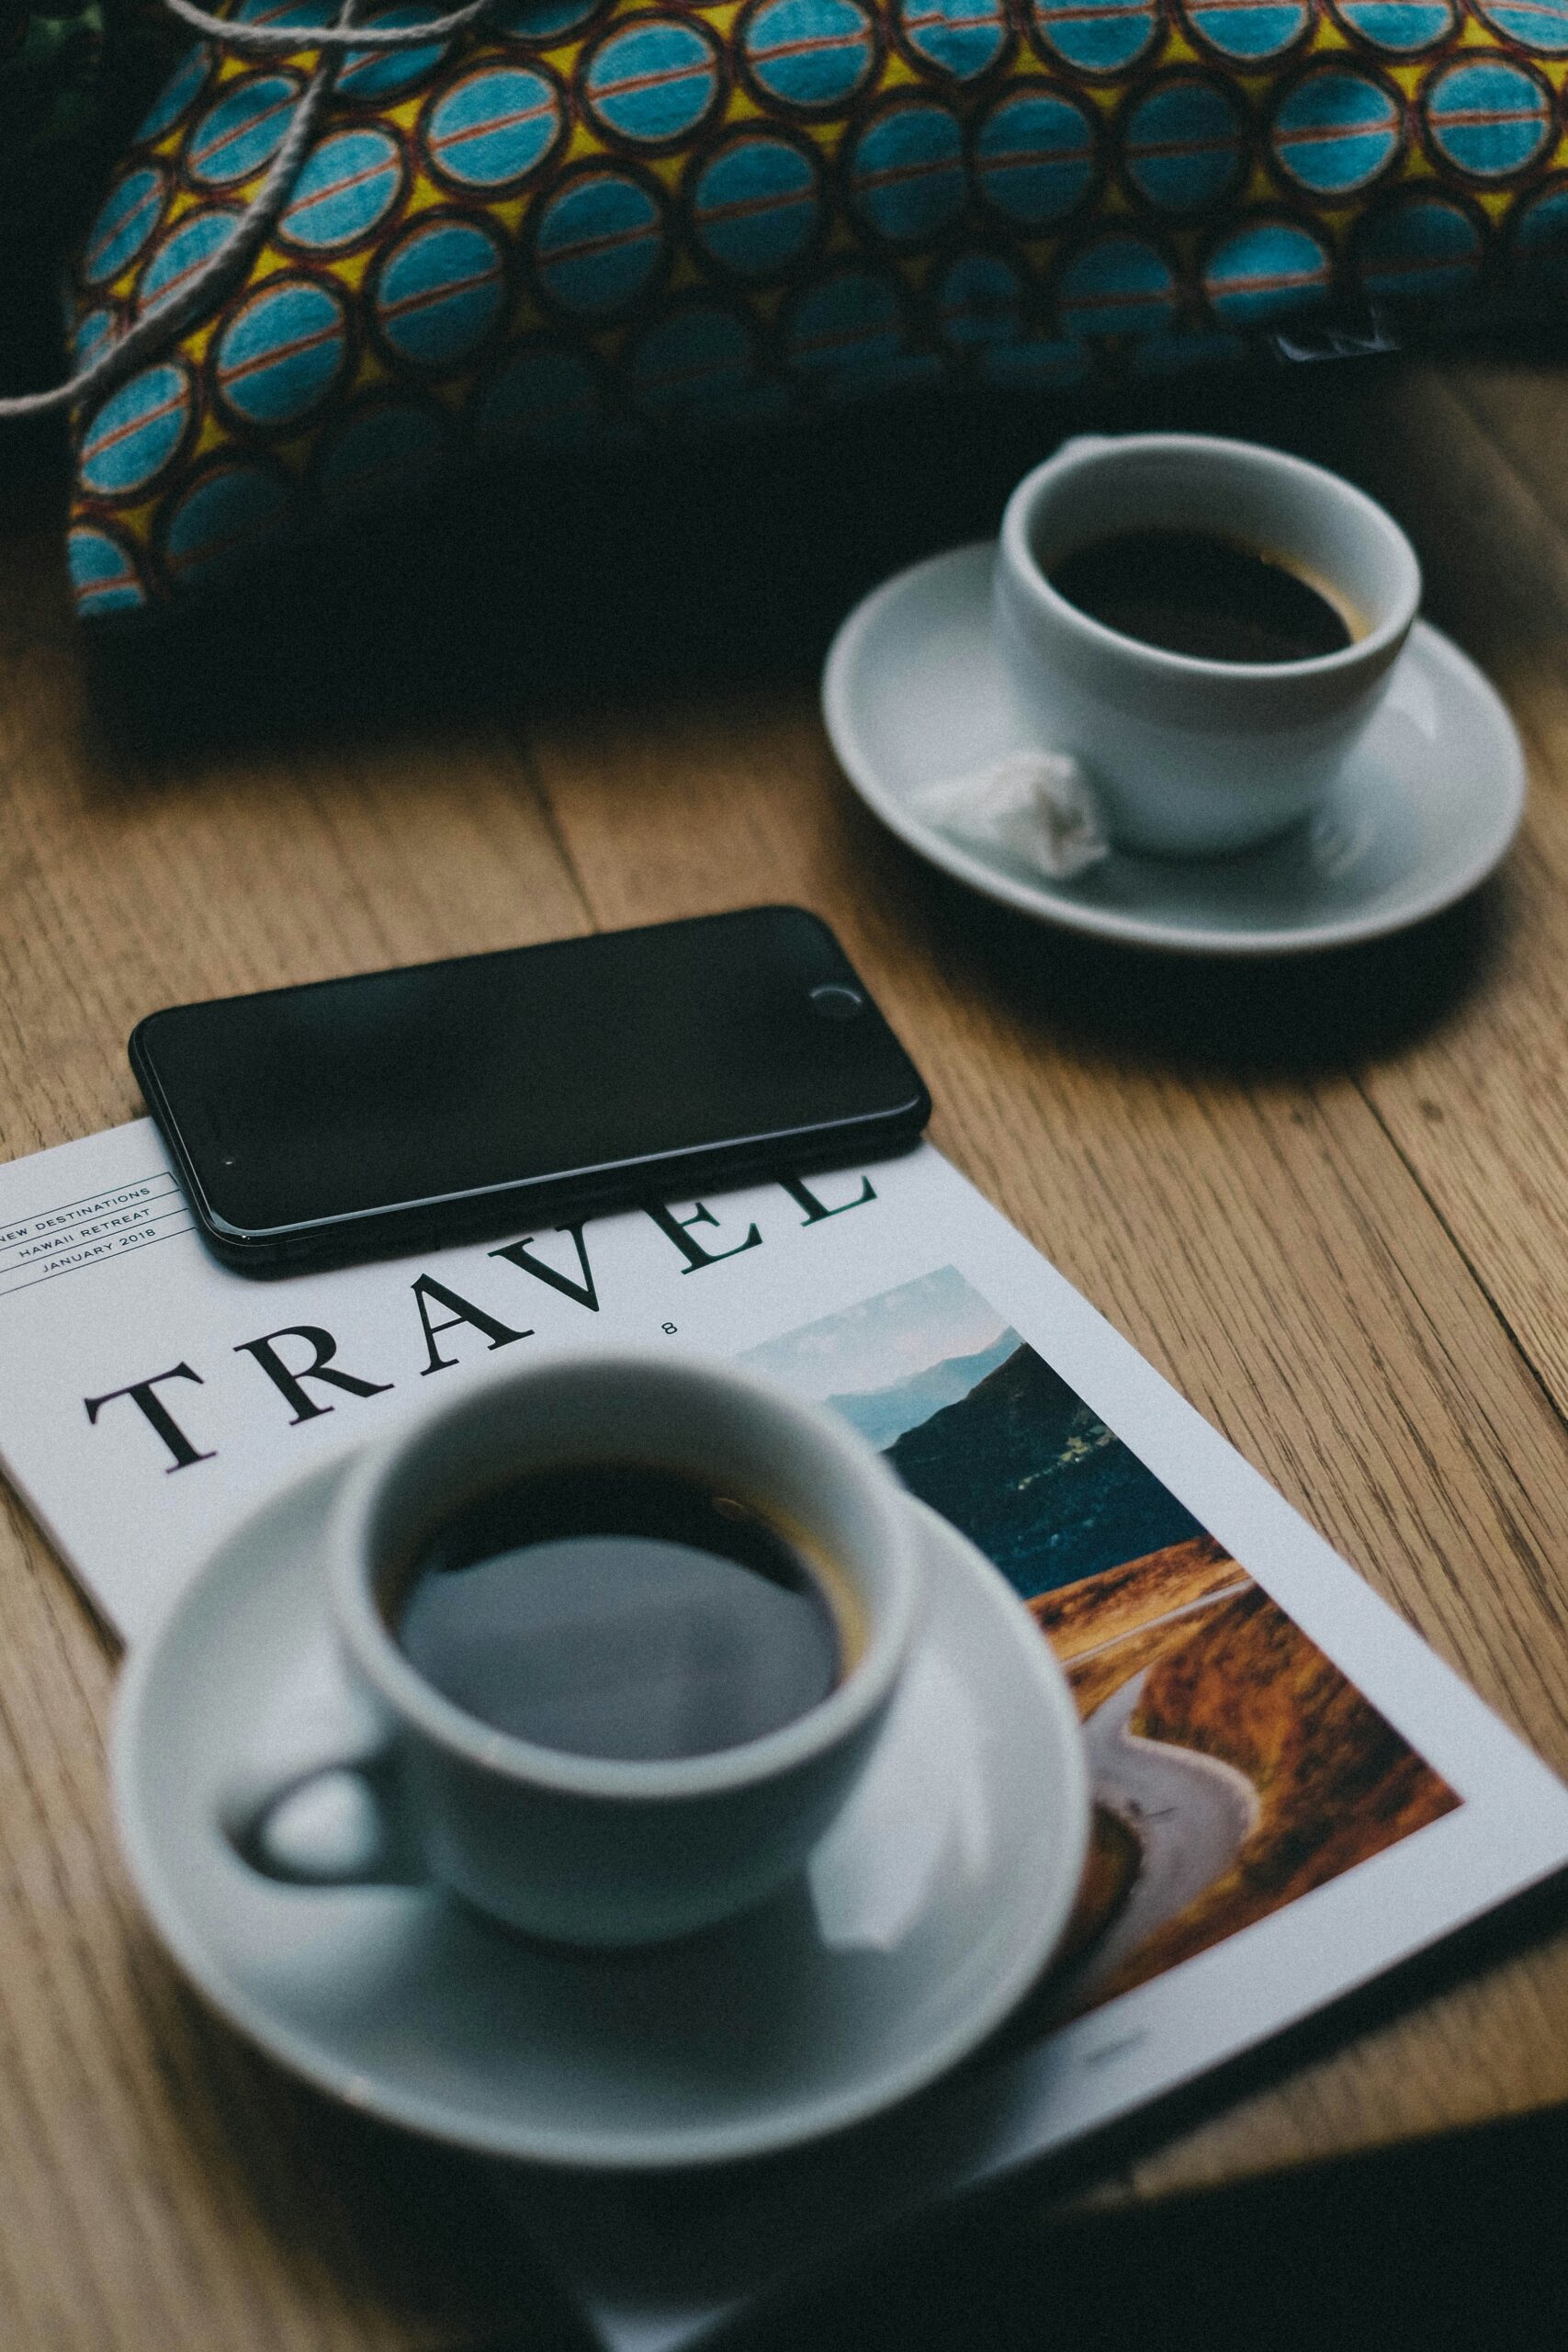 Travel magazines are a great source of information when researching where to visit next.